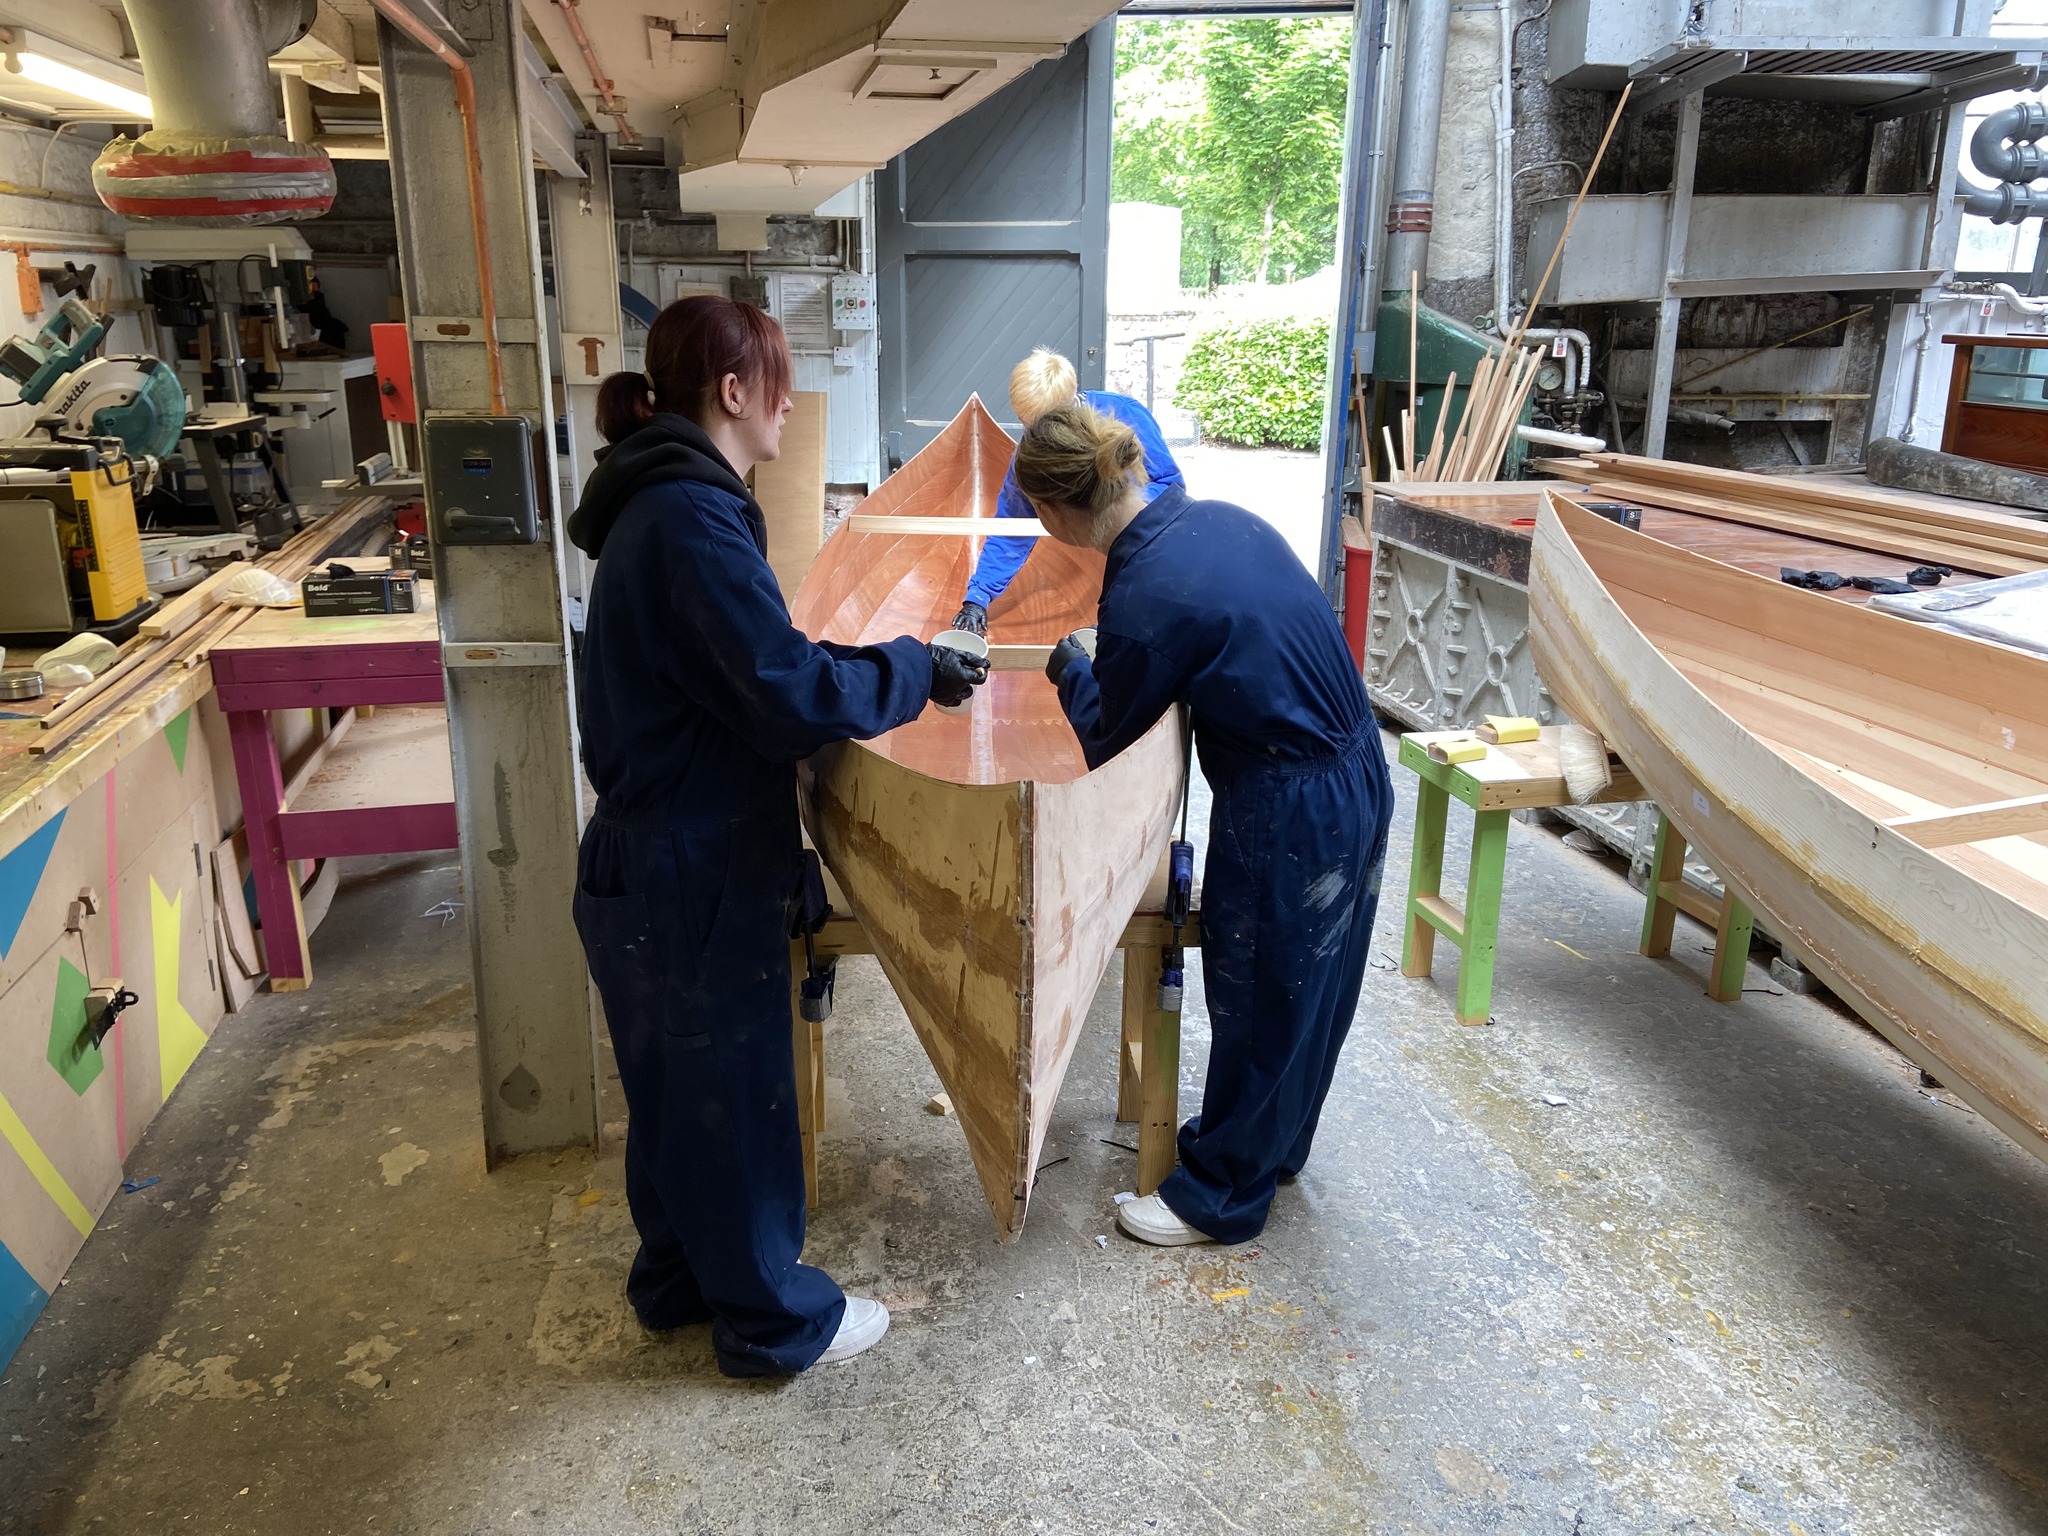 Two young women work on a wooden canoe in a boat workshop